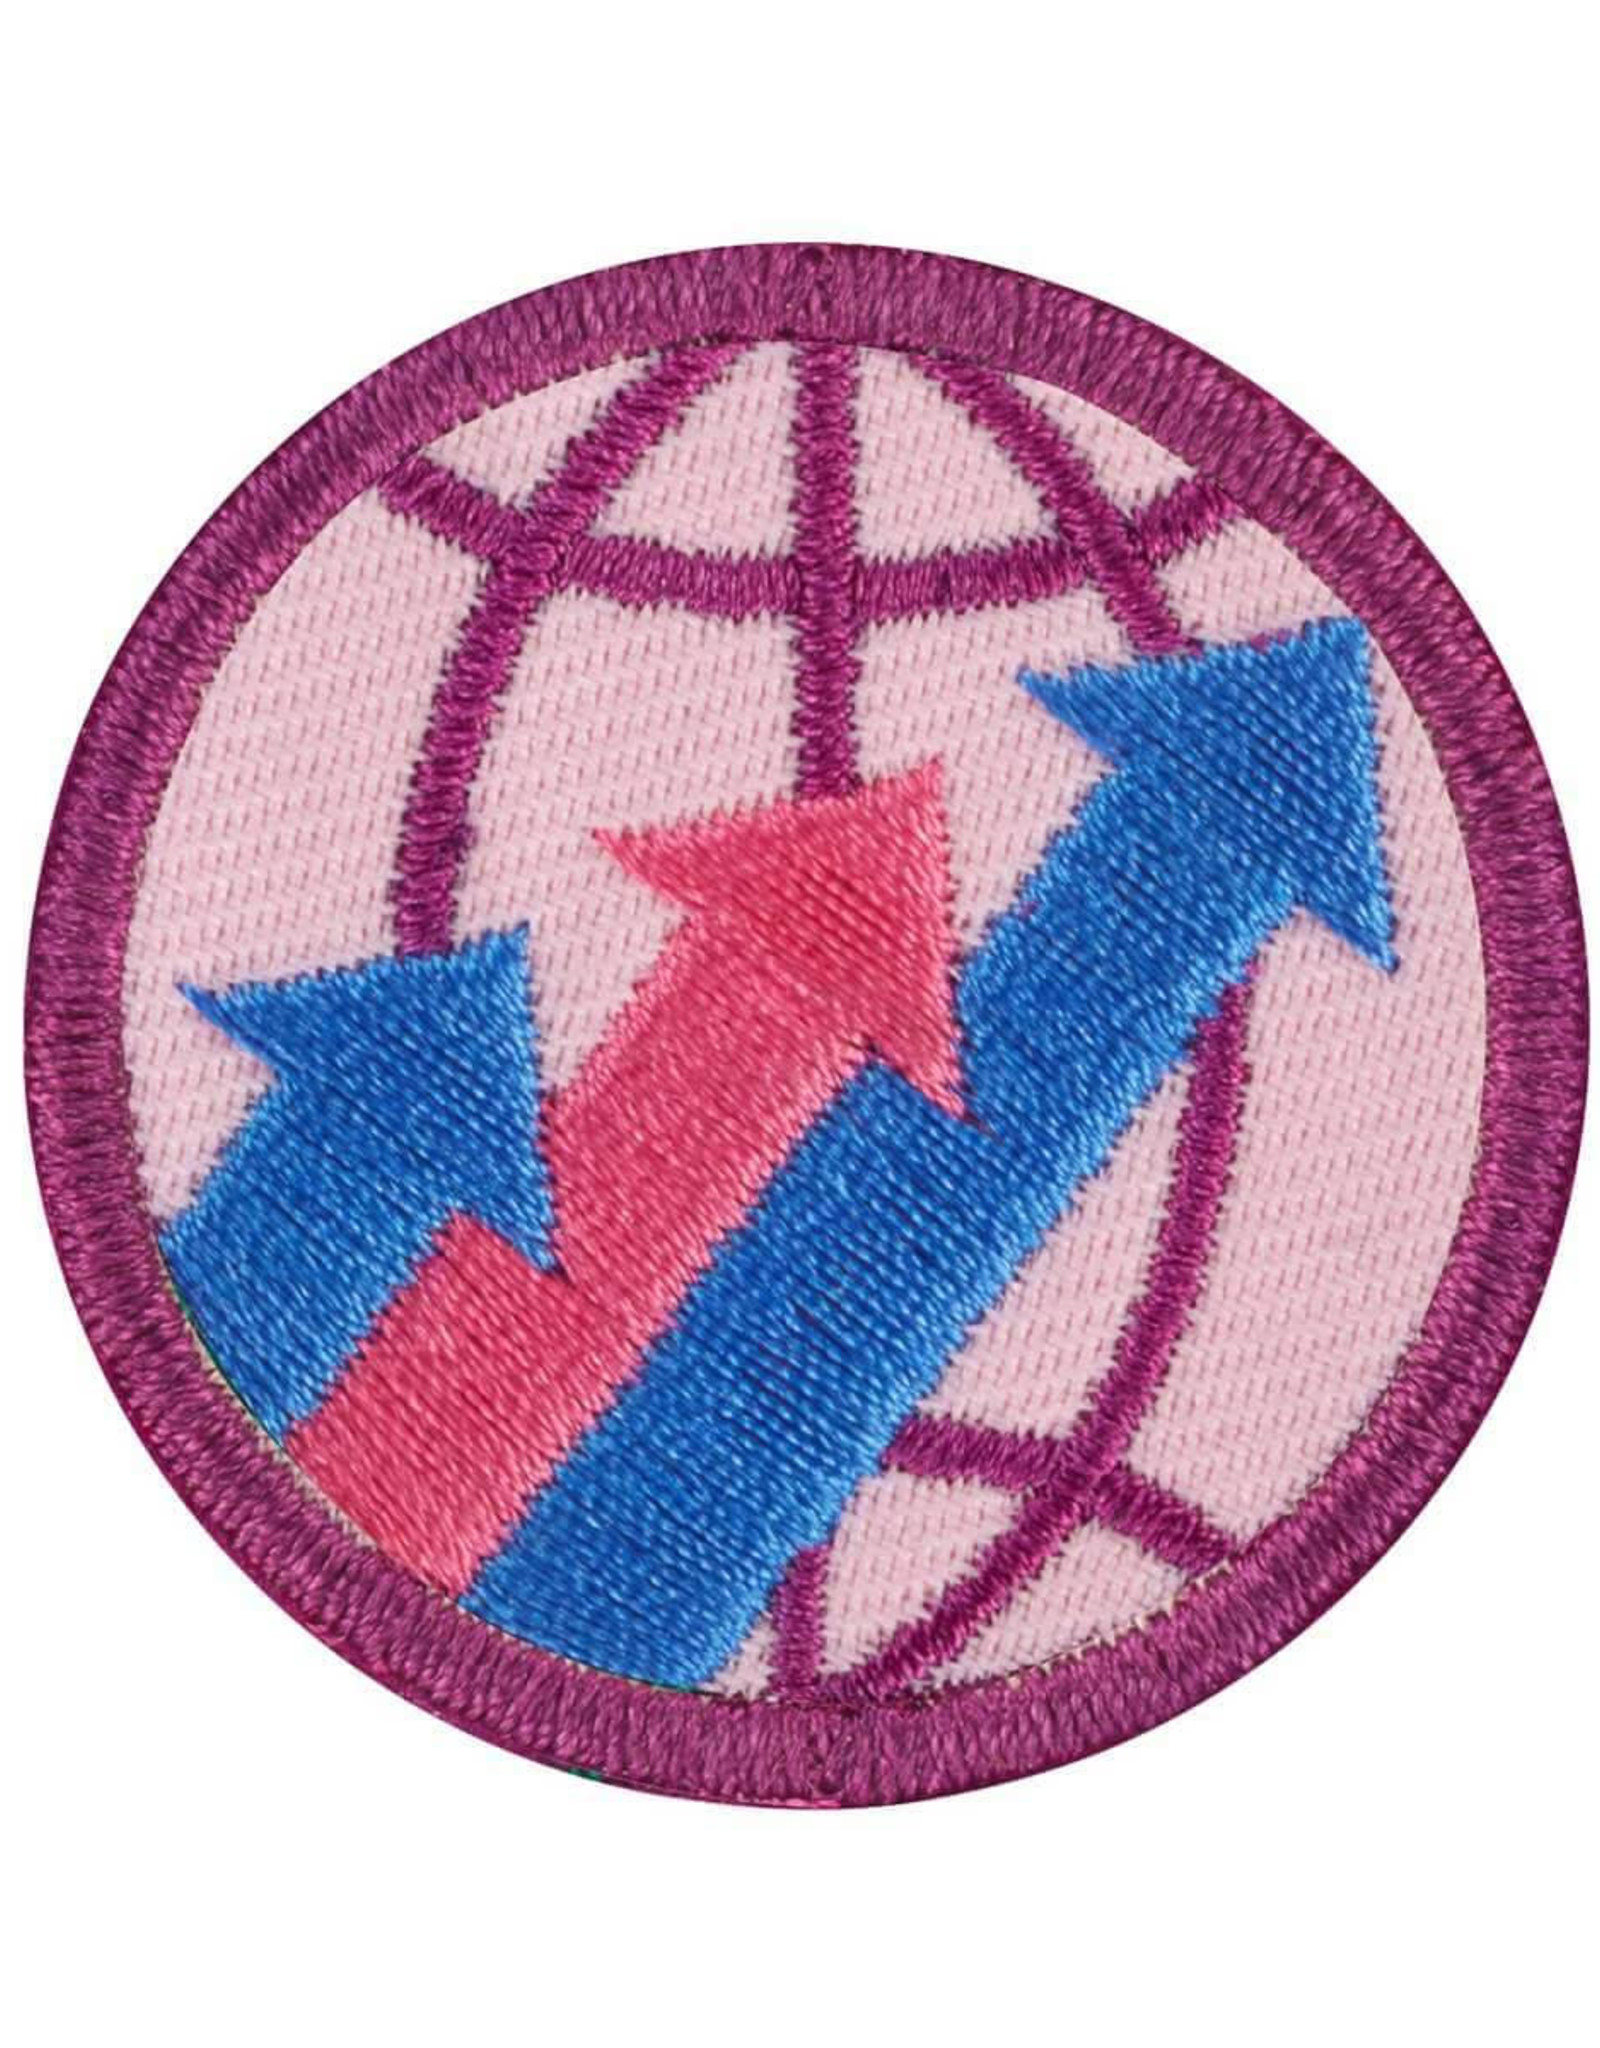 GIRL SCOUTS OF THE USA Junior Global Action Award Year 1 Badge